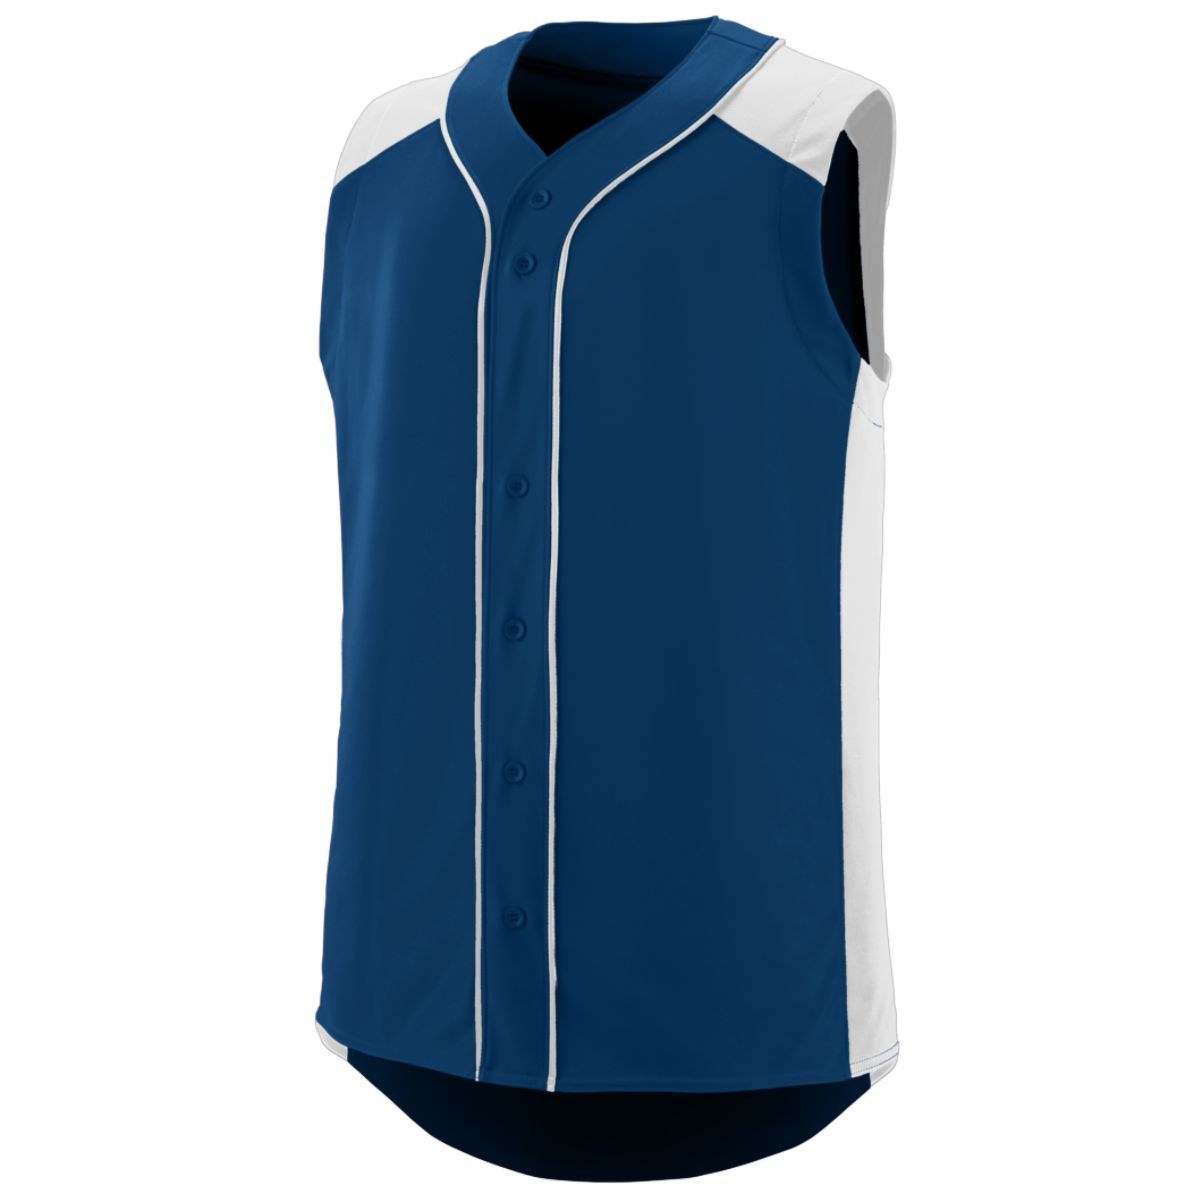 Augusta Sportswear Sleeveless Slugger Jersey in Navy/White  -Part of the Adult, Adult-Jersey, Augusta-Products, Baseball, Shirts, All-Sports, All-Sports-1 product lines at KanaleyCreations.com